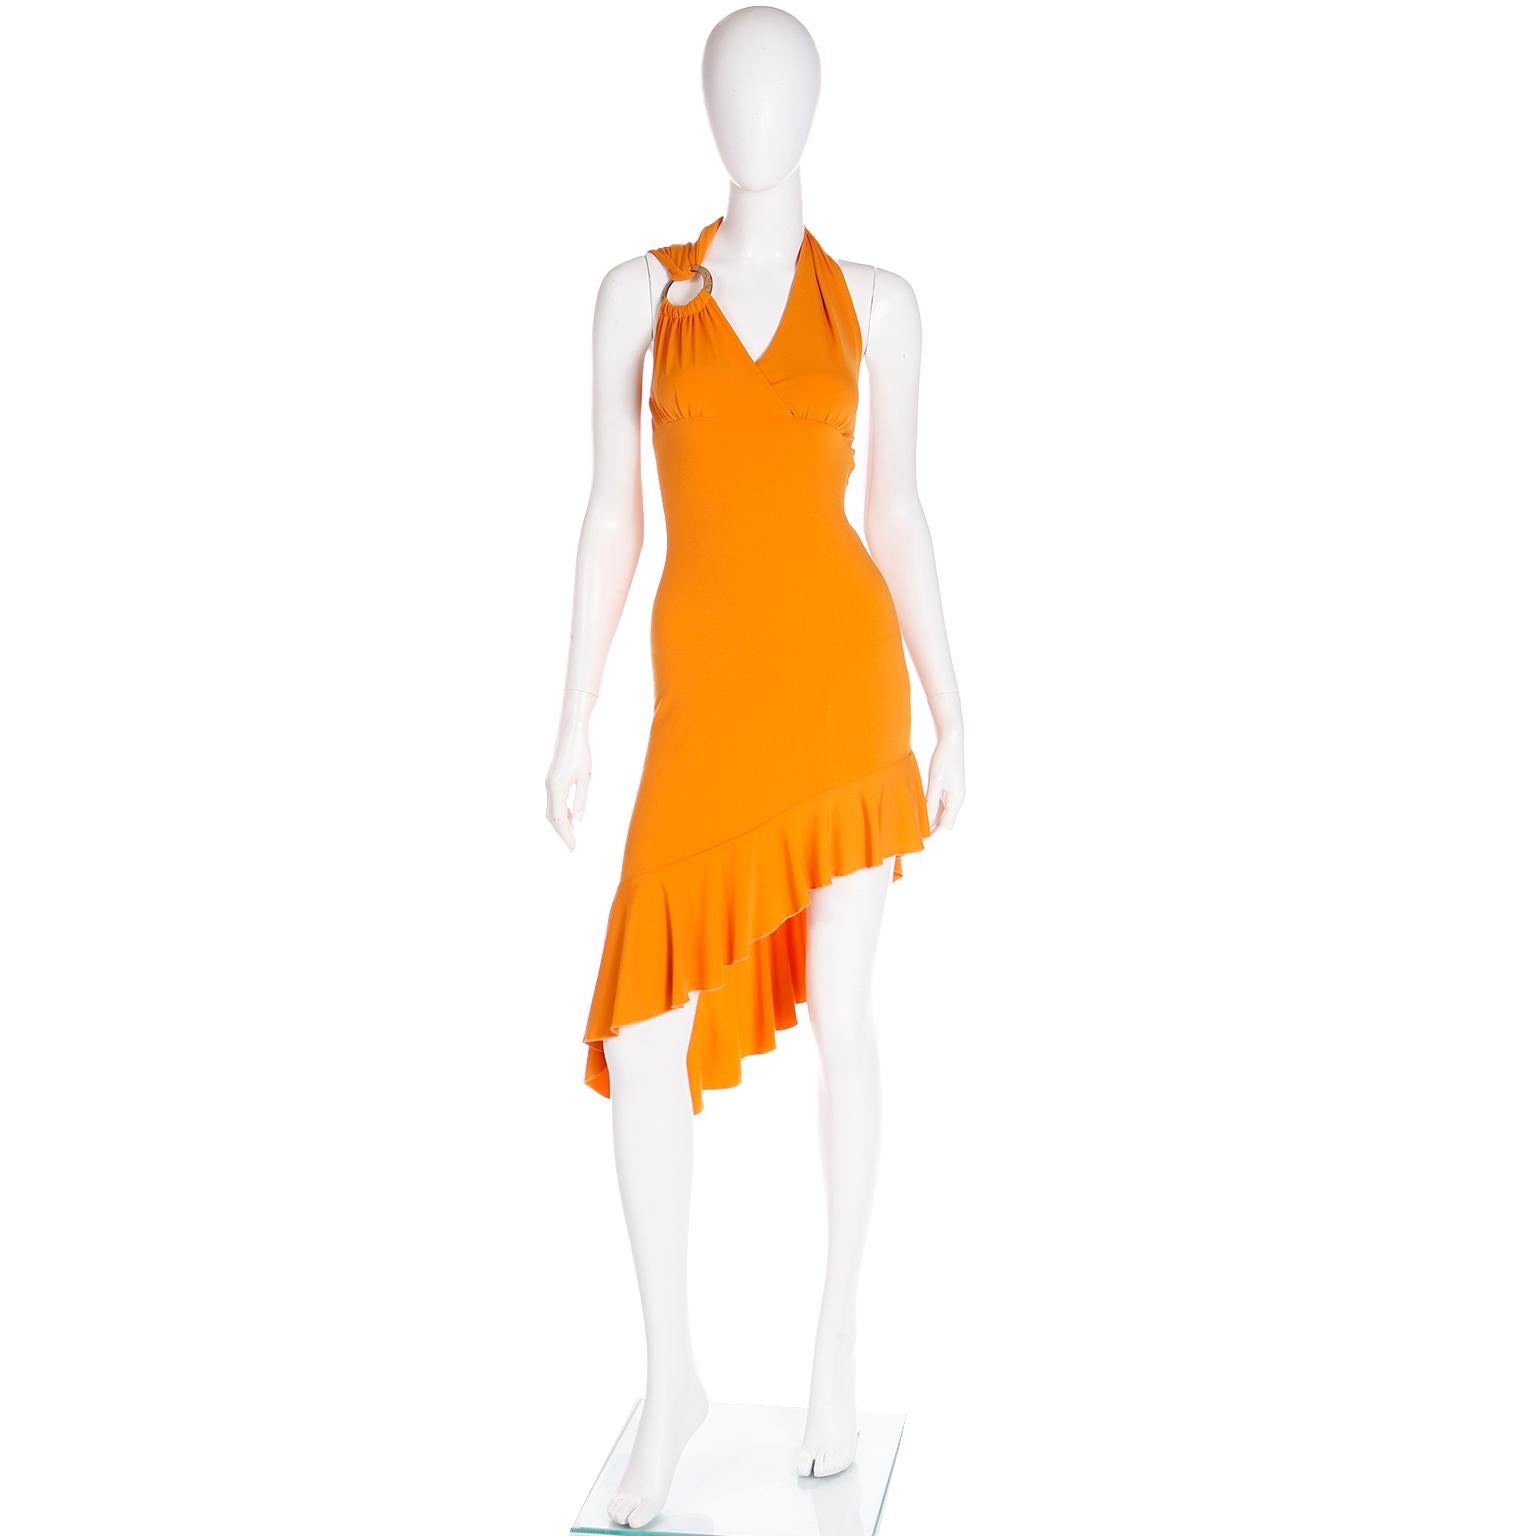 We think this incredible vintage Gianni Versace orange dress is such a great example of Y2k fashion done right! This Versace dress is deadstock with its original tag attached and it has so much effortless style!
This tangerine orange jersey dress